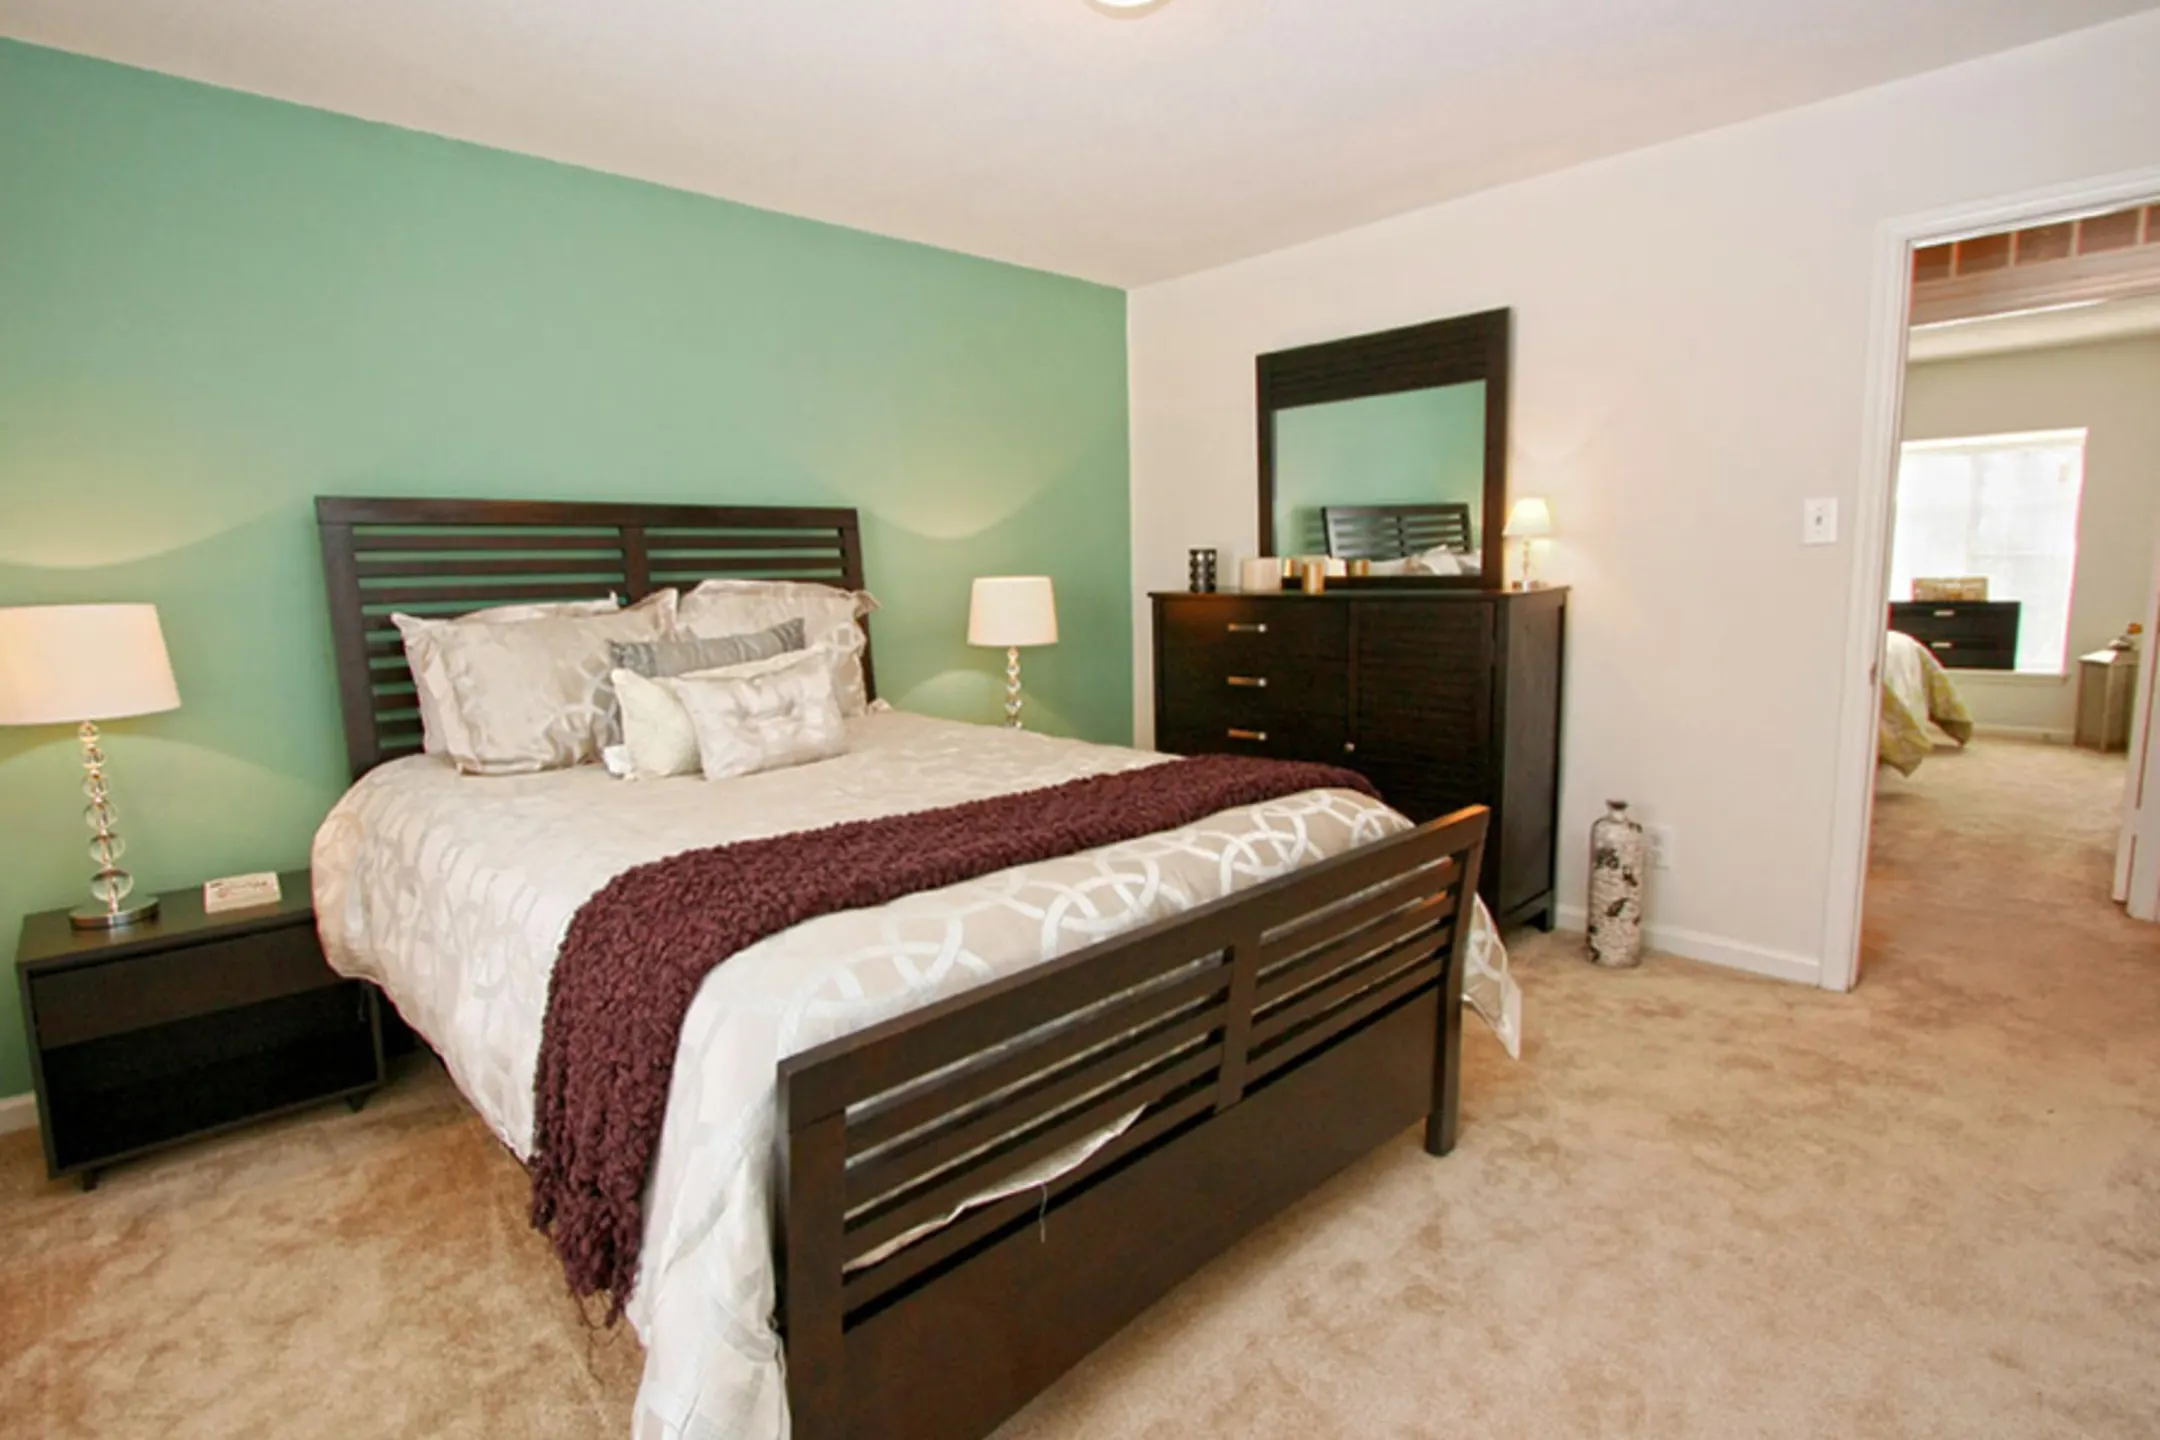 Bedroom - The Residences at 1805 - Greensboro, NC